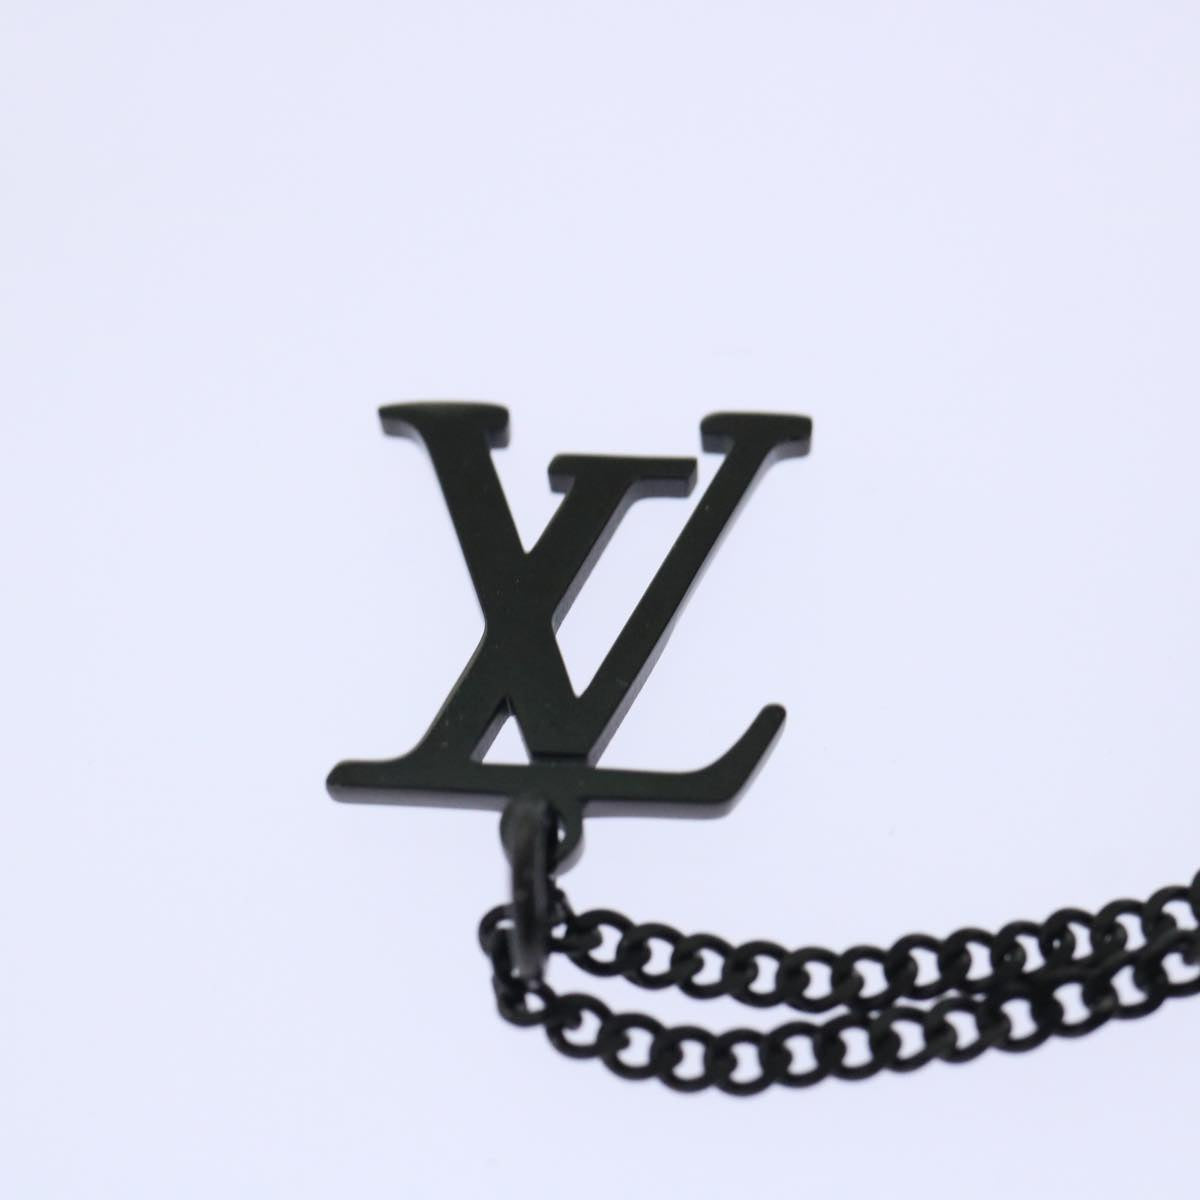 Louis Vuitton Women's Black Metal Necklace with Iconic Design in Black